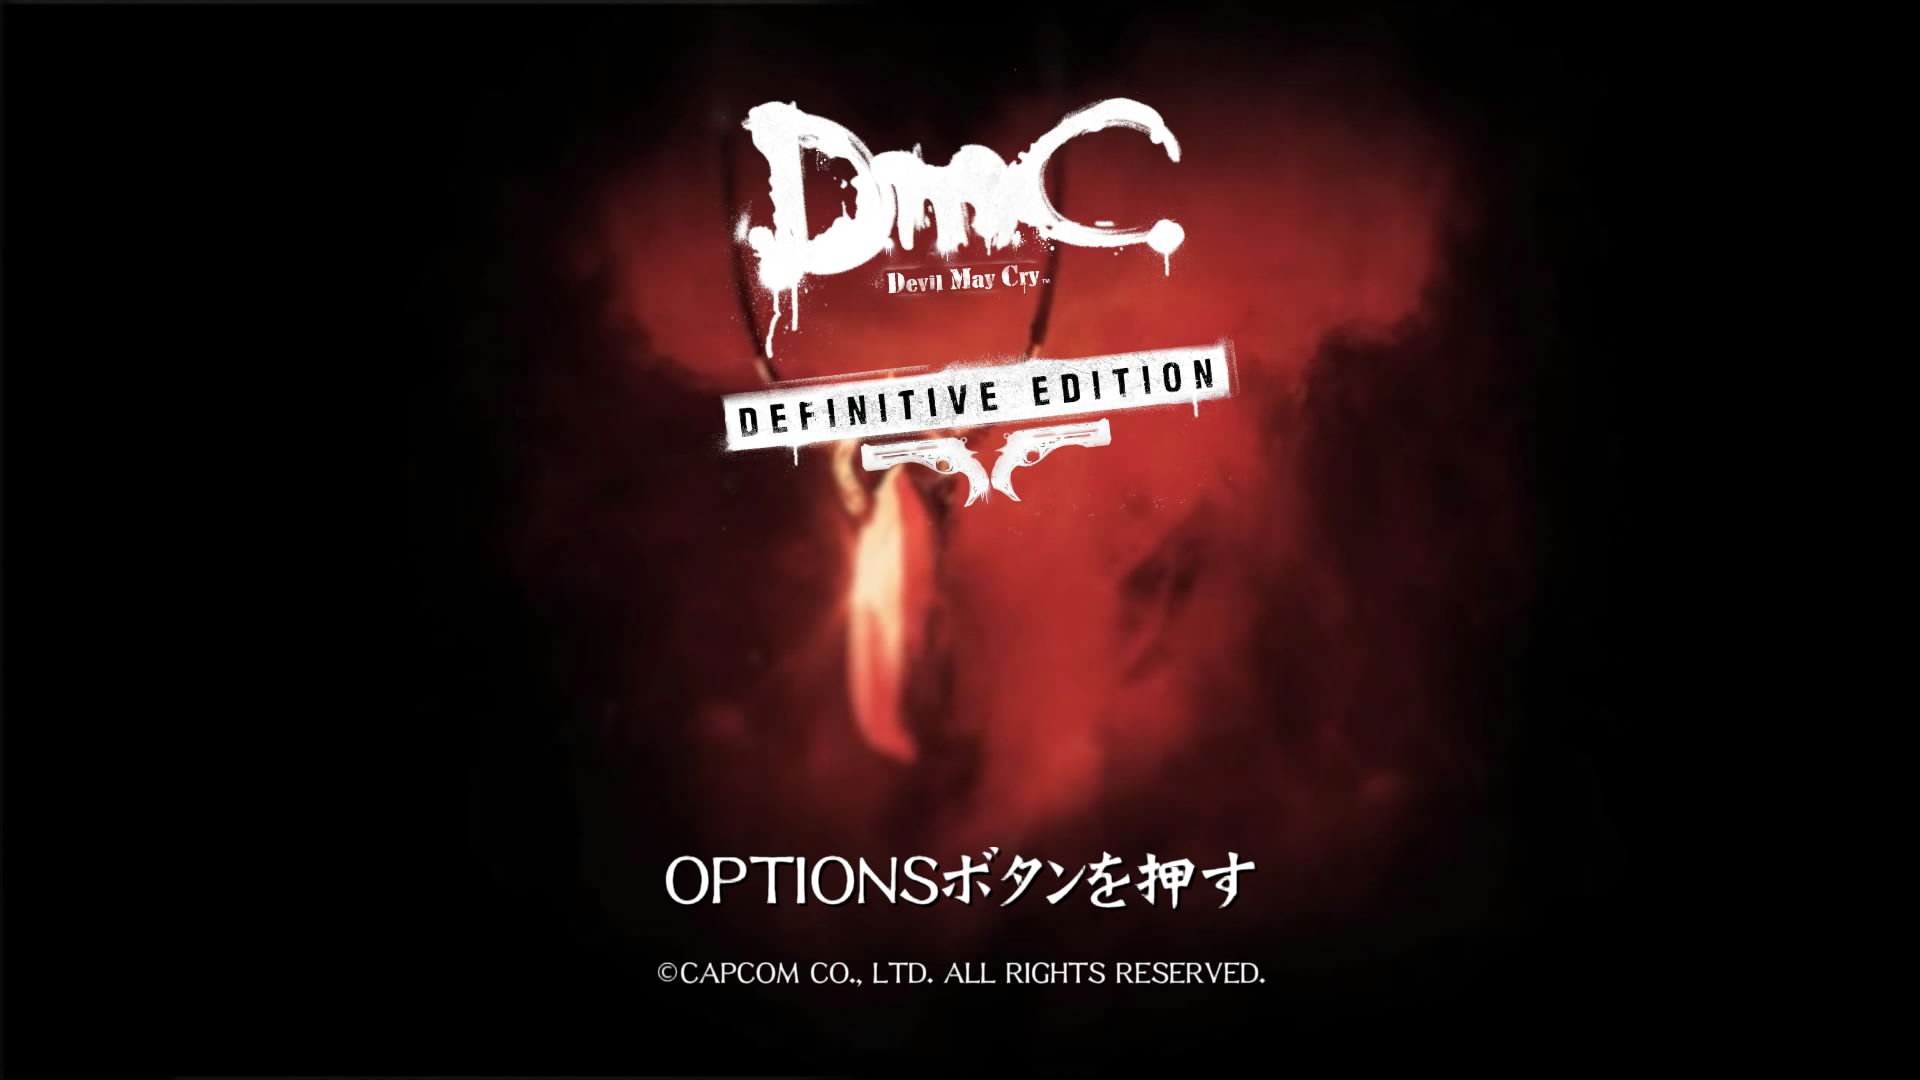 Dmc devil may cry definitive edition review 02